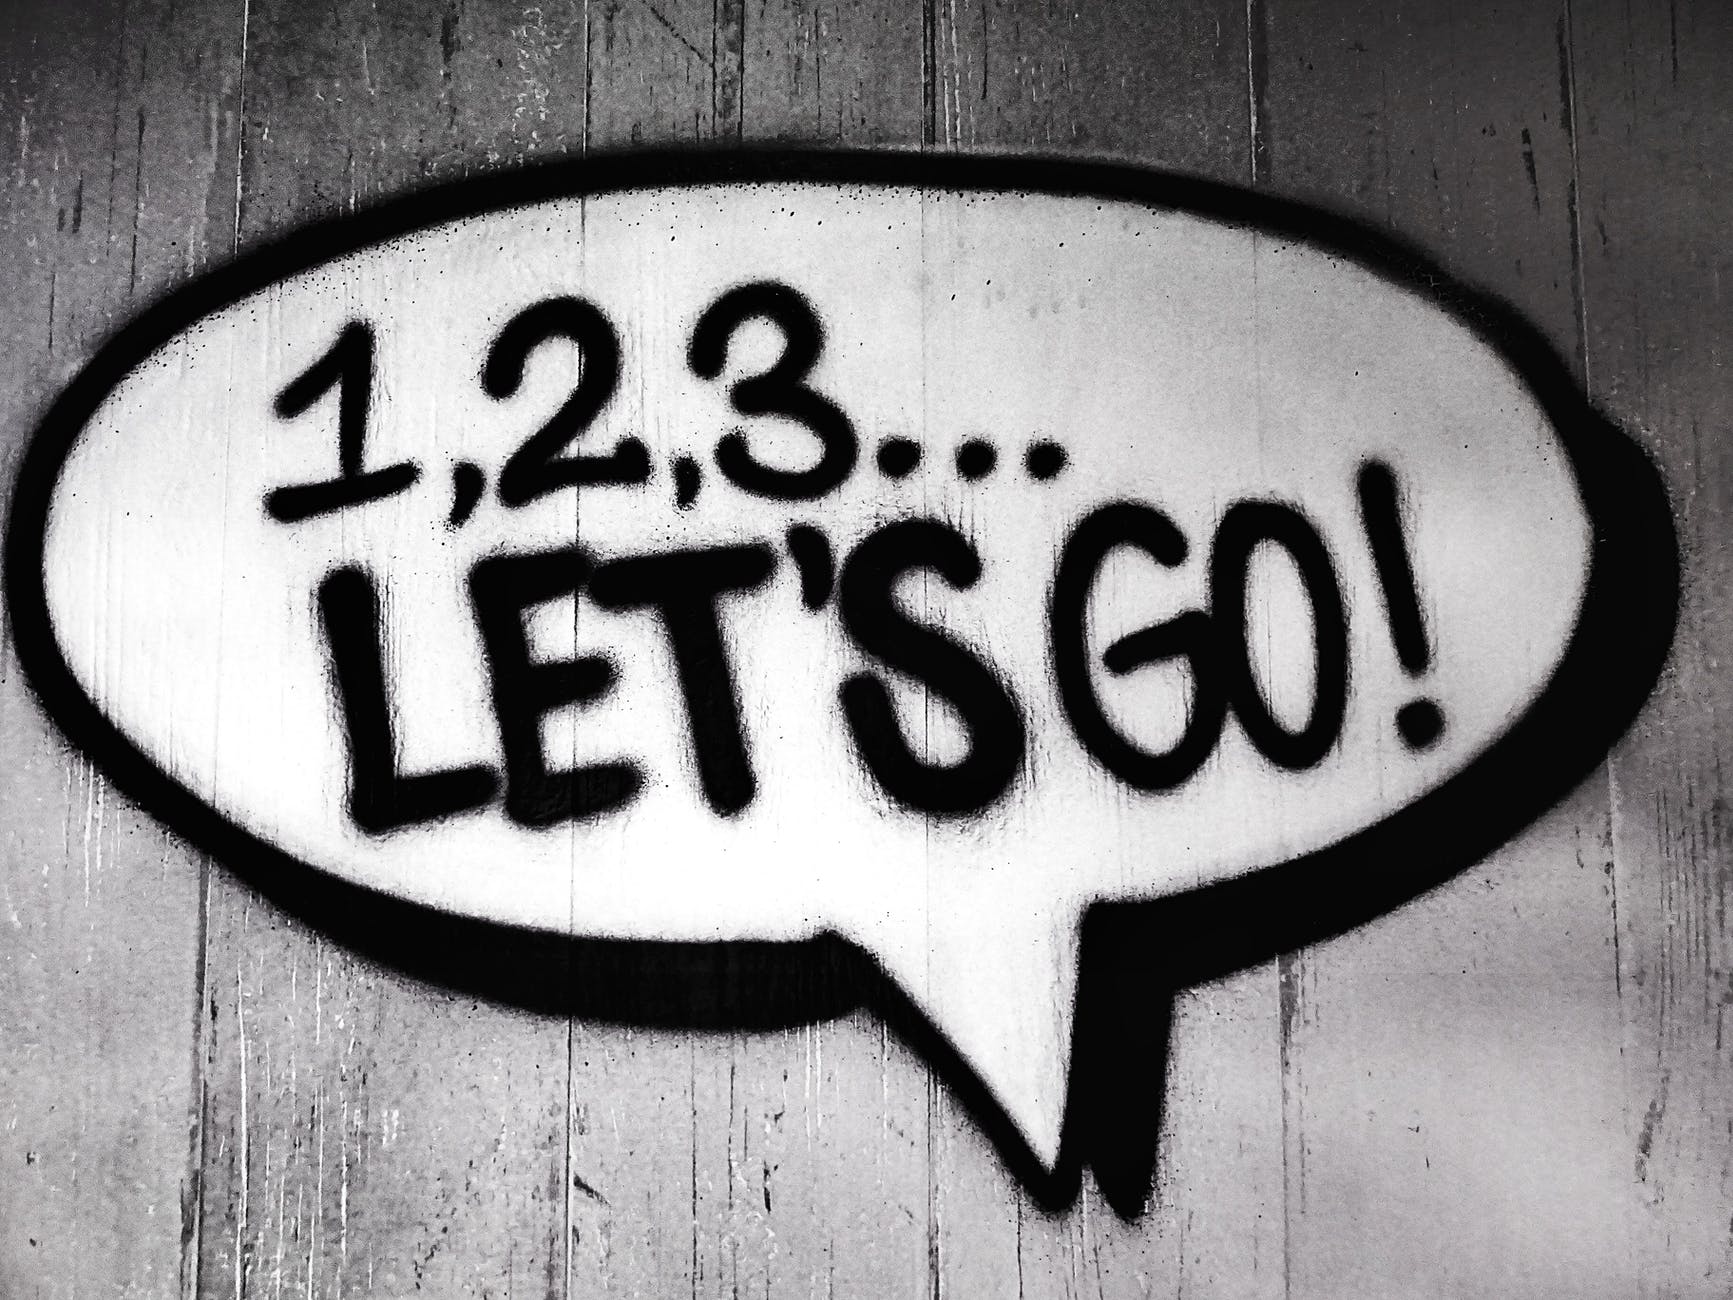 Speech bubble spray painted on wooden fence with '1, 2, 3 let's go' inside it 